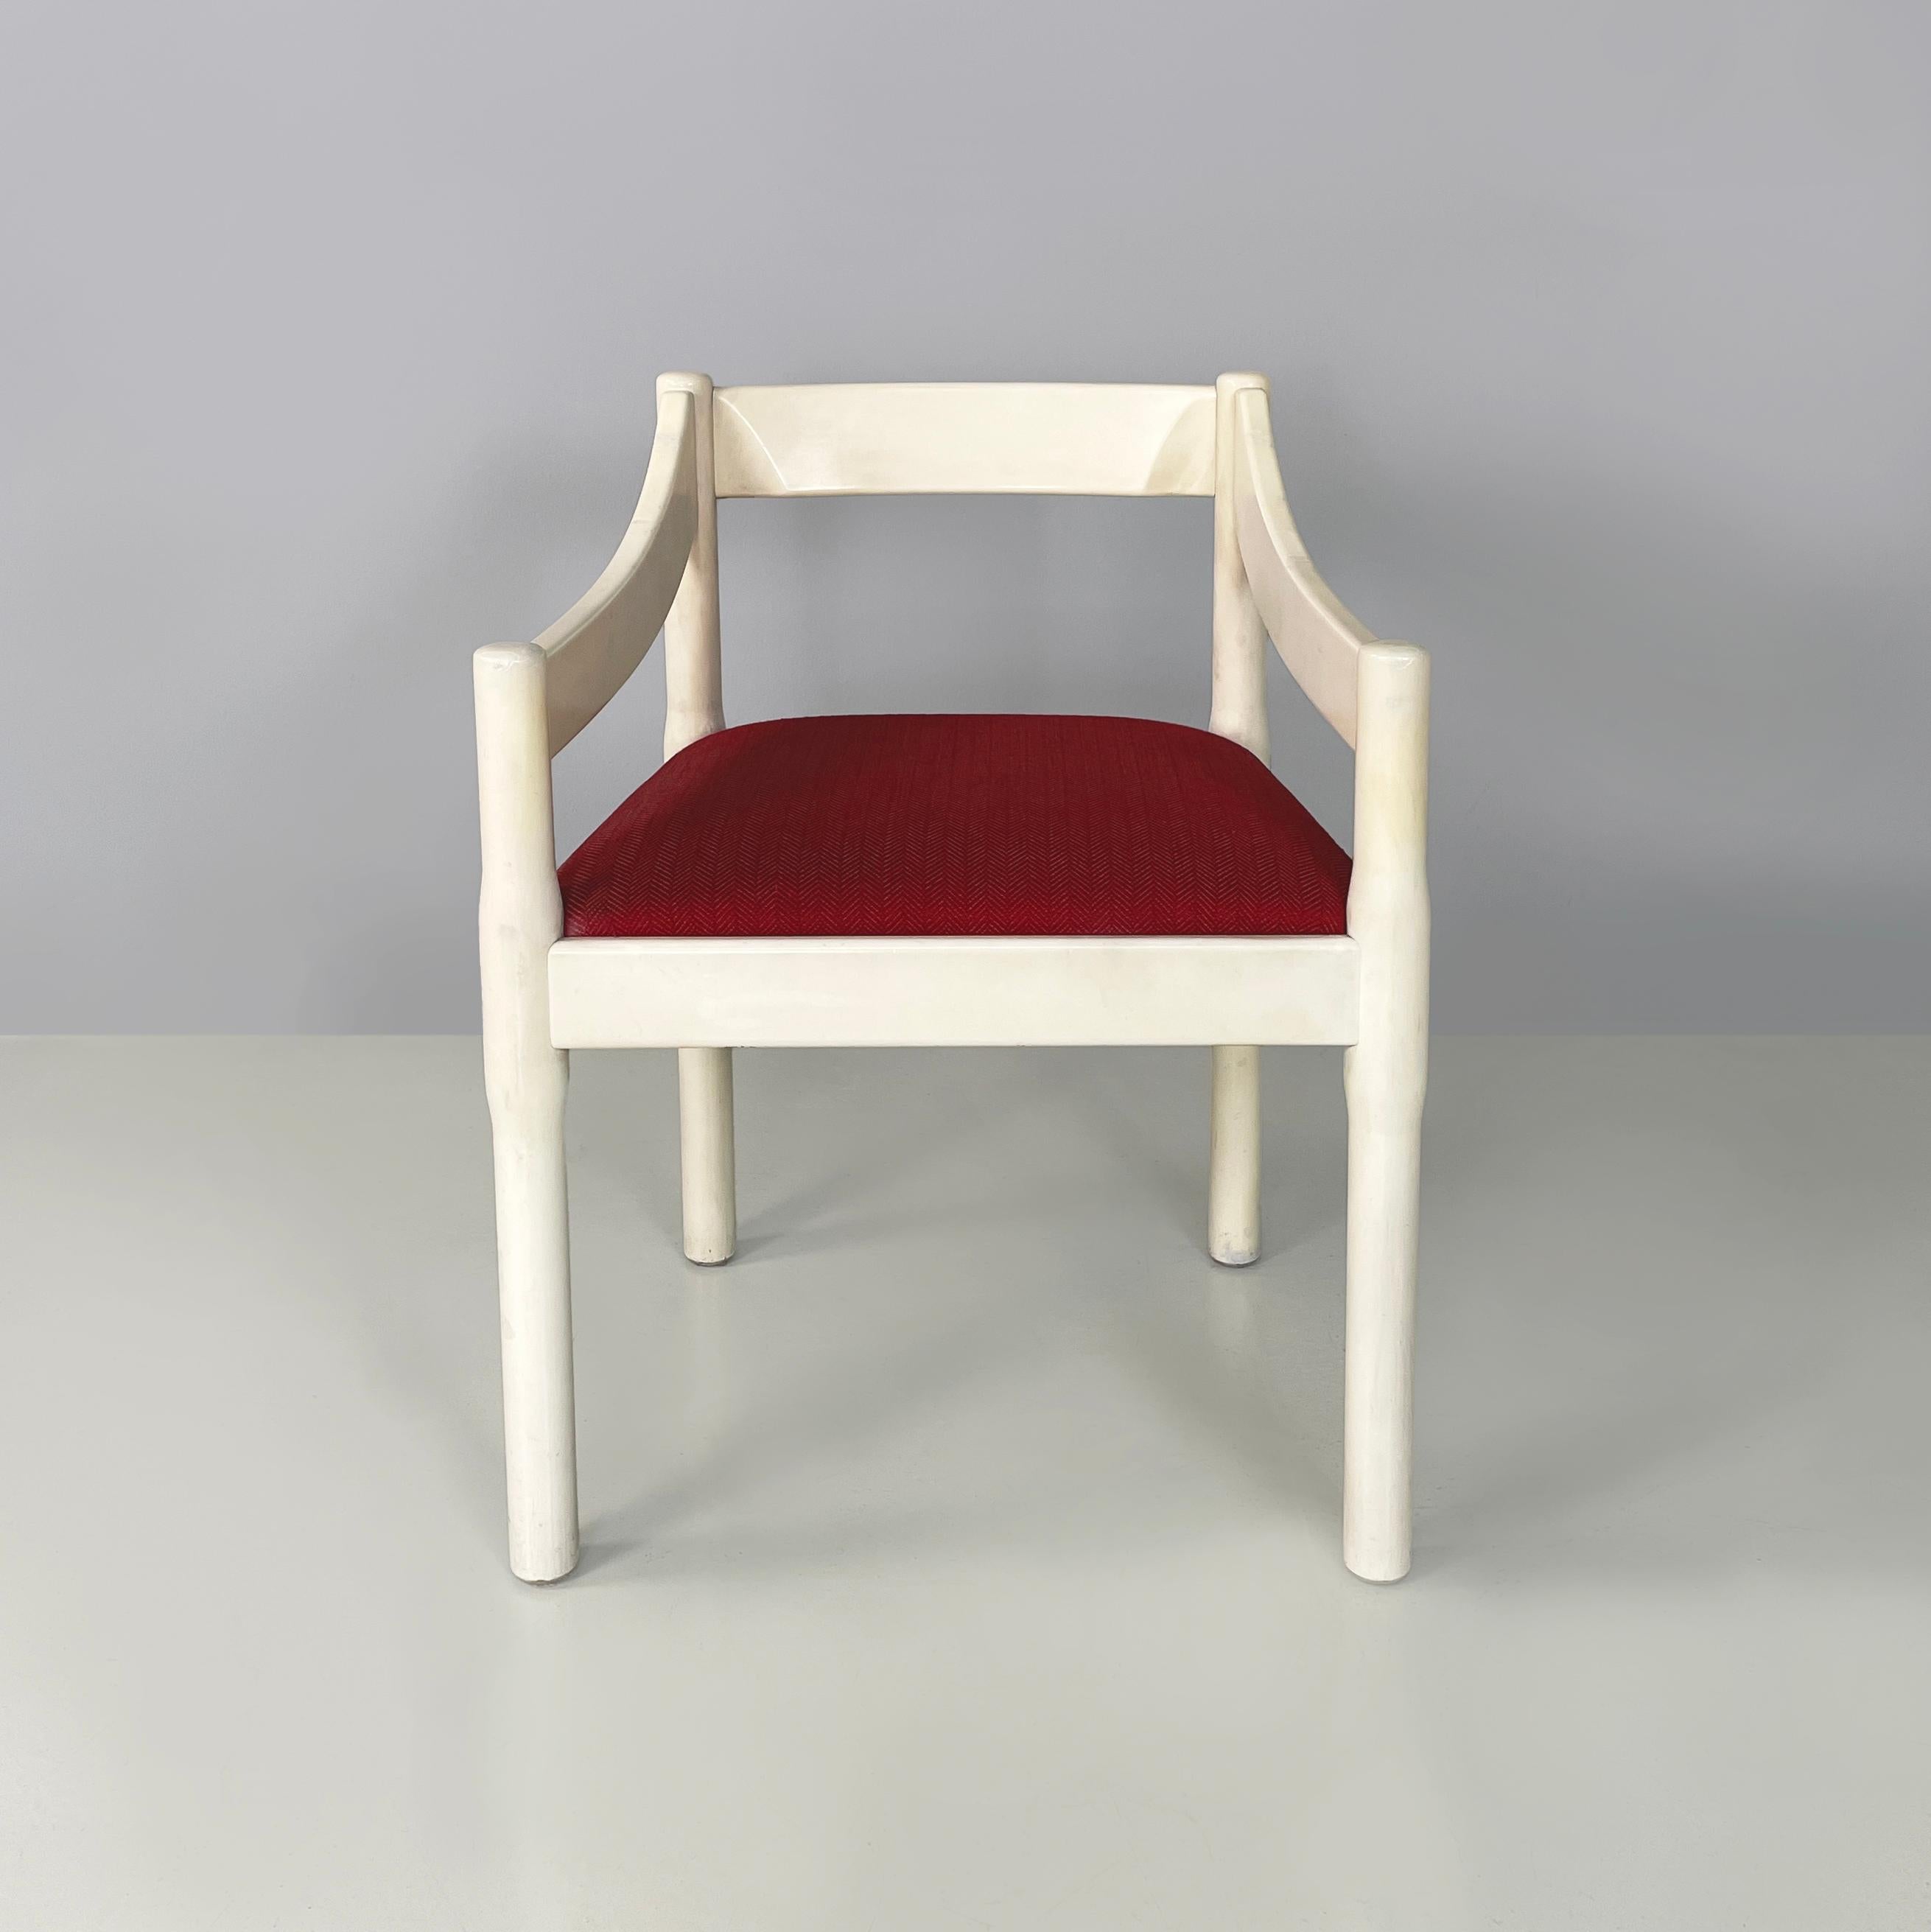 Italian mid-century modern Chair Carimate by Vico Magistretti for Cassina, 1970s
Chair mod. Carimate in white lacquered wood with glossy finish and seat, padded  and covered in red fabric. The armrests and backrest have a rectangular section and